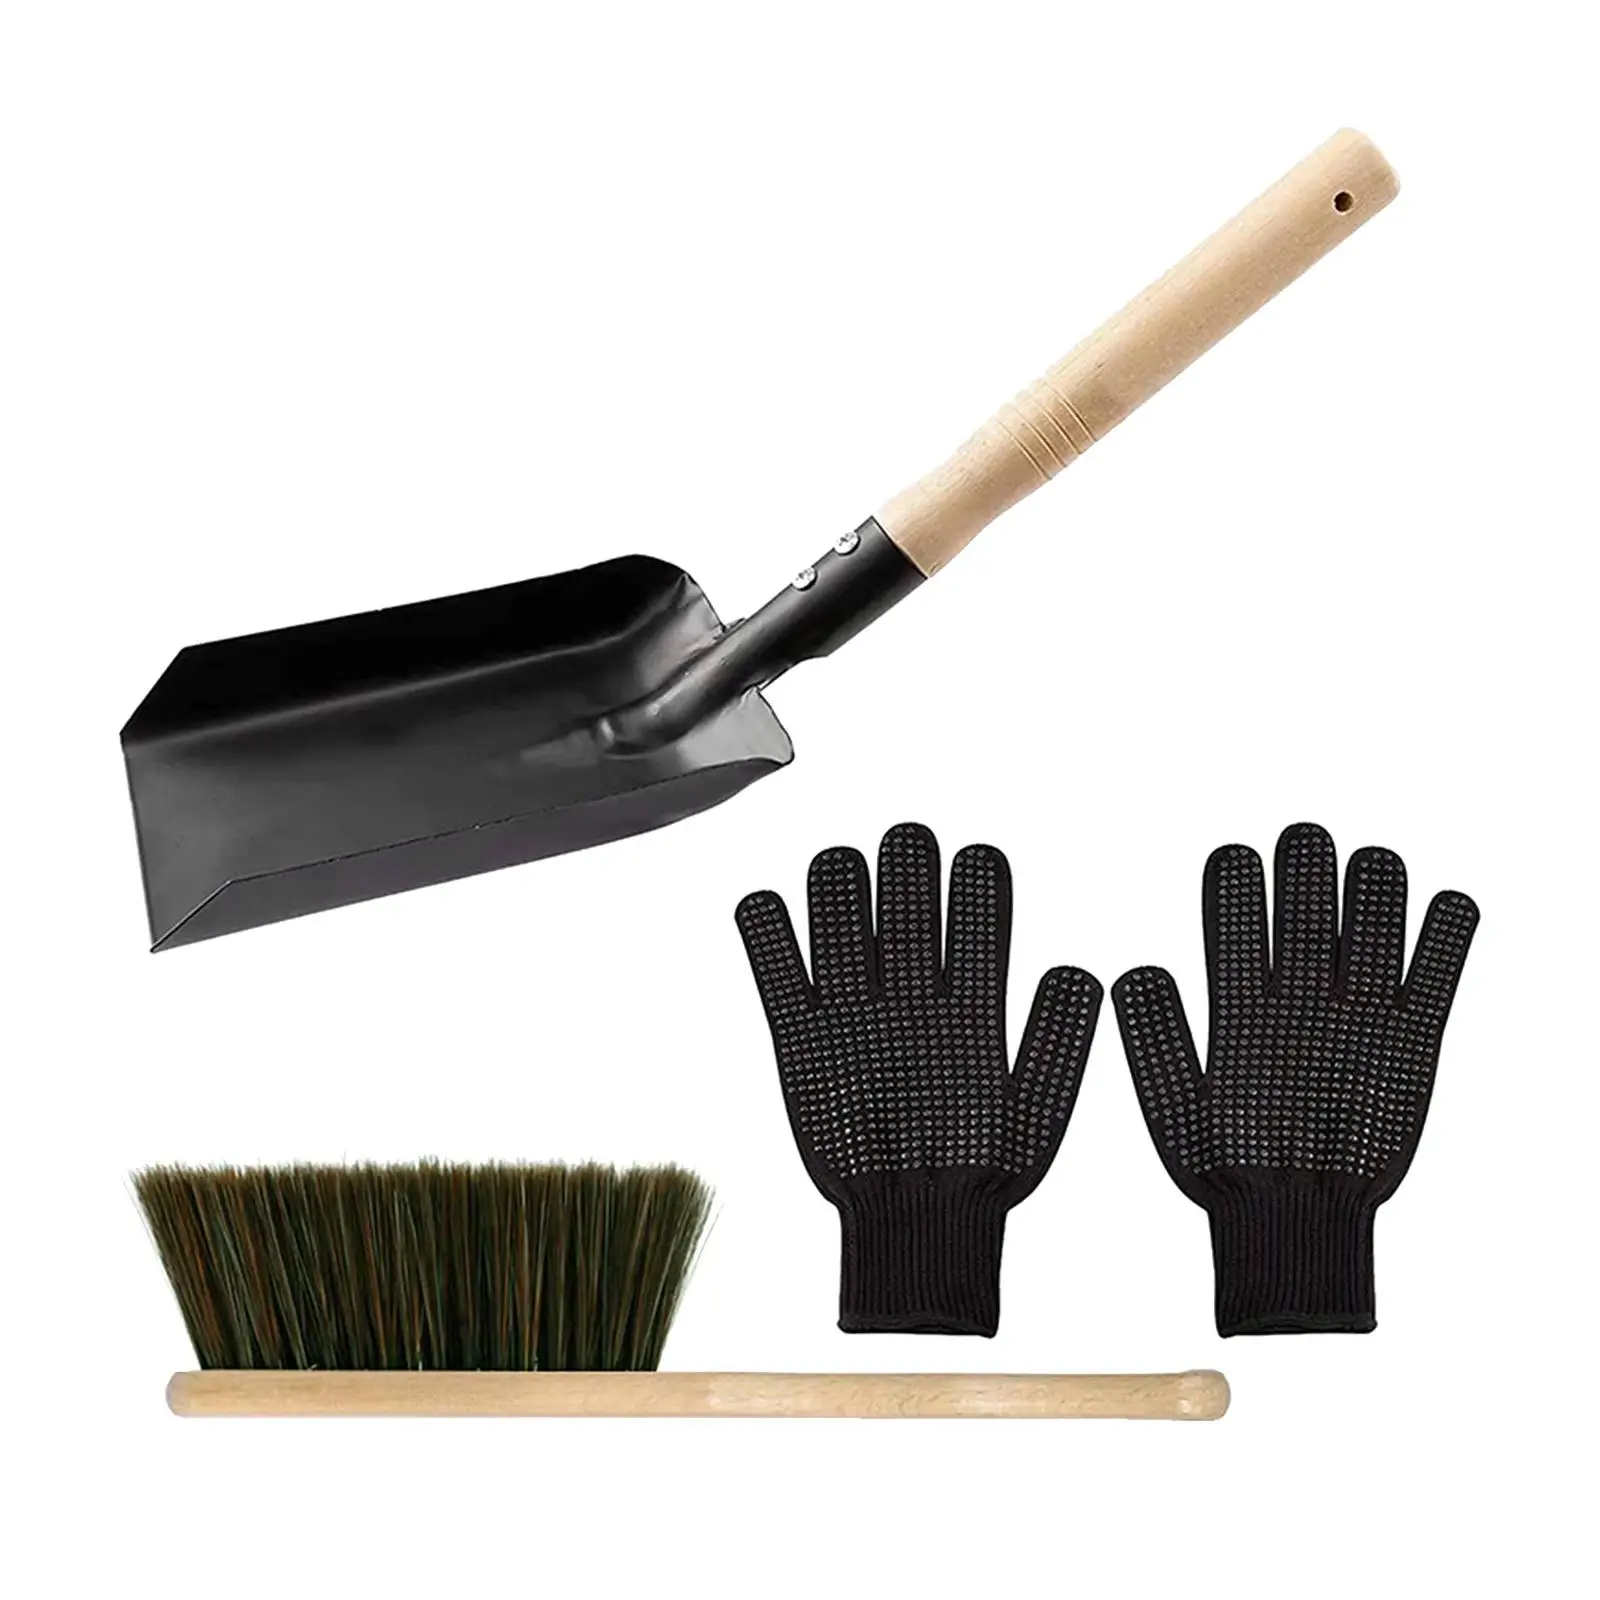 Fire Place Tool Set Shovel and Hearth Brush Set Hearth Tidy Ash Fireside Black Gloves Accessories for Dust Cleaning Indoor